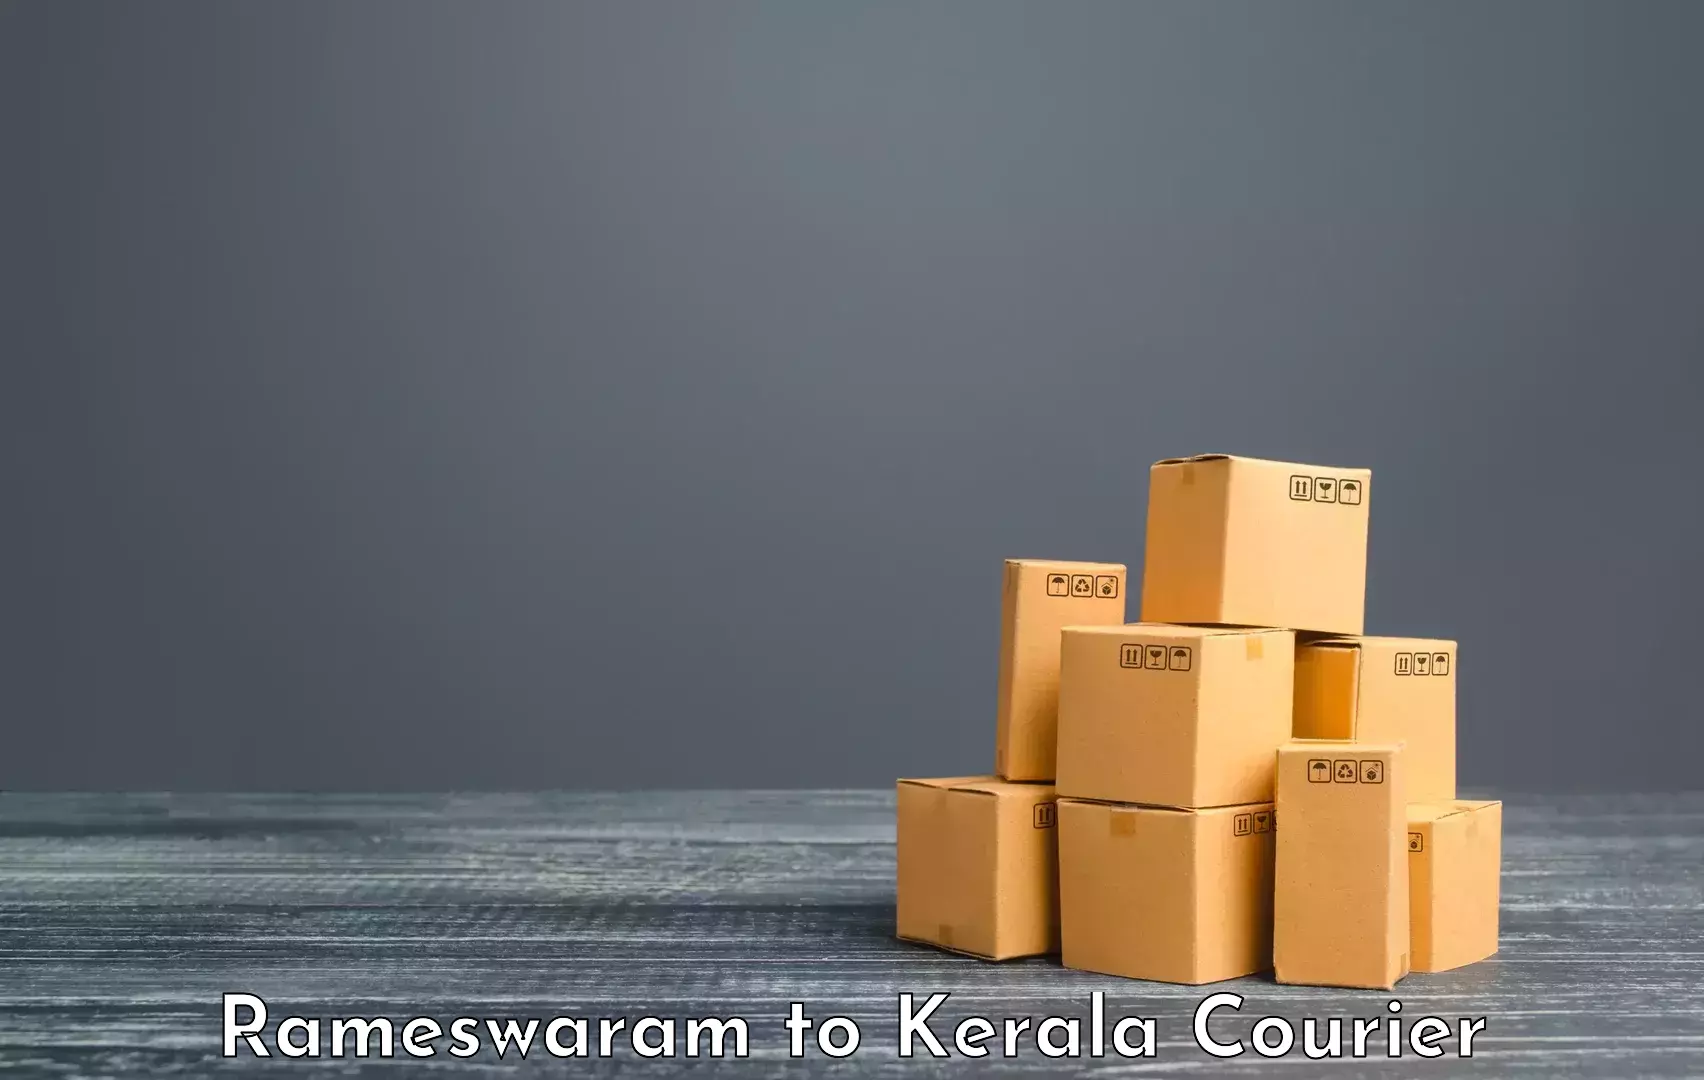 Luggage delivery system Rameswaram to Kerala